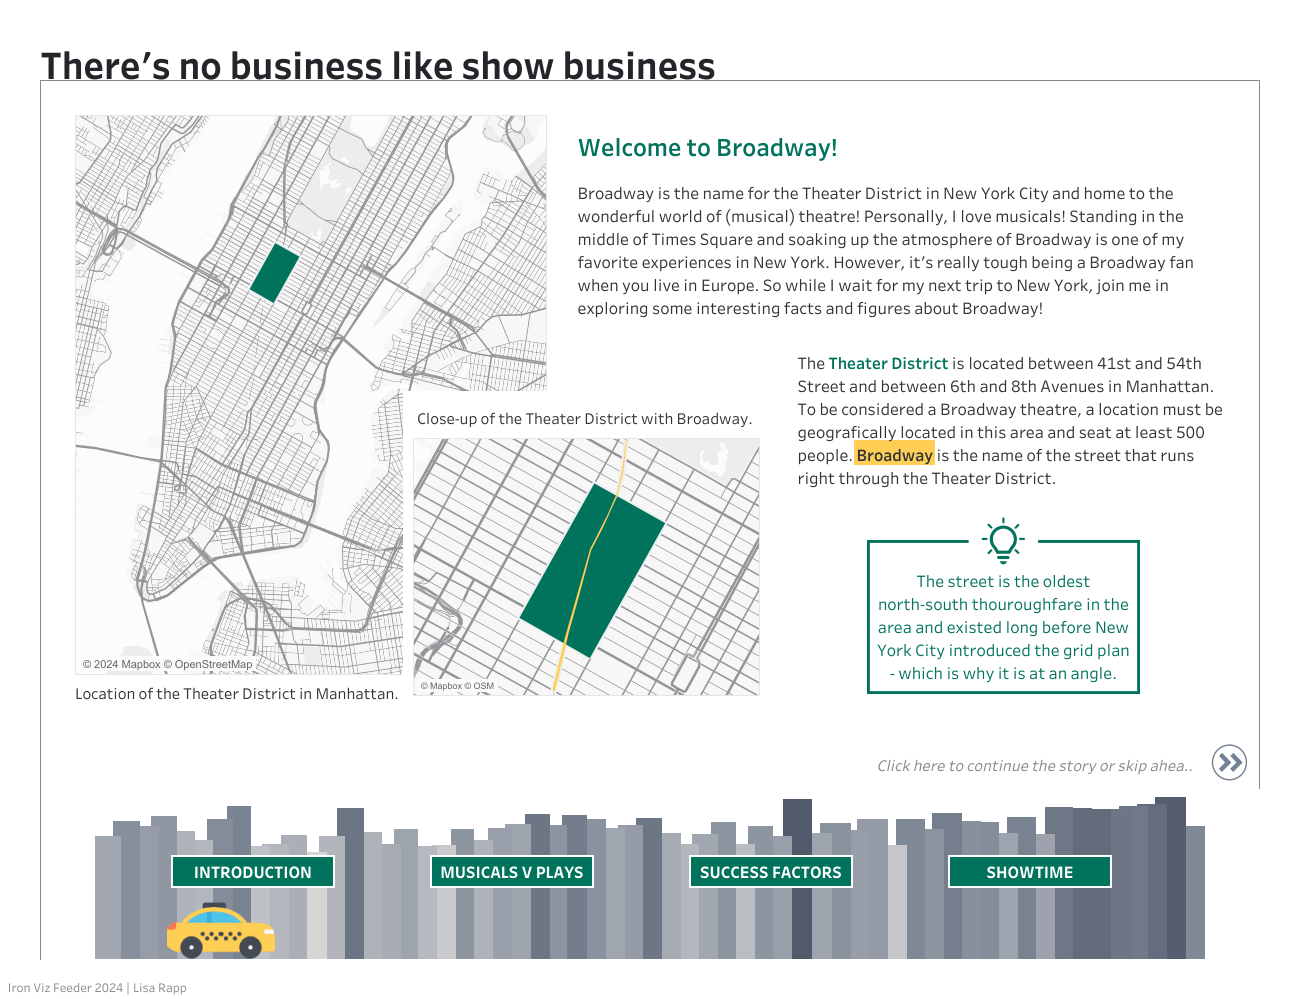 Visualization titled There's no business like show business about Broadway musicals, showing a green map of the musical district